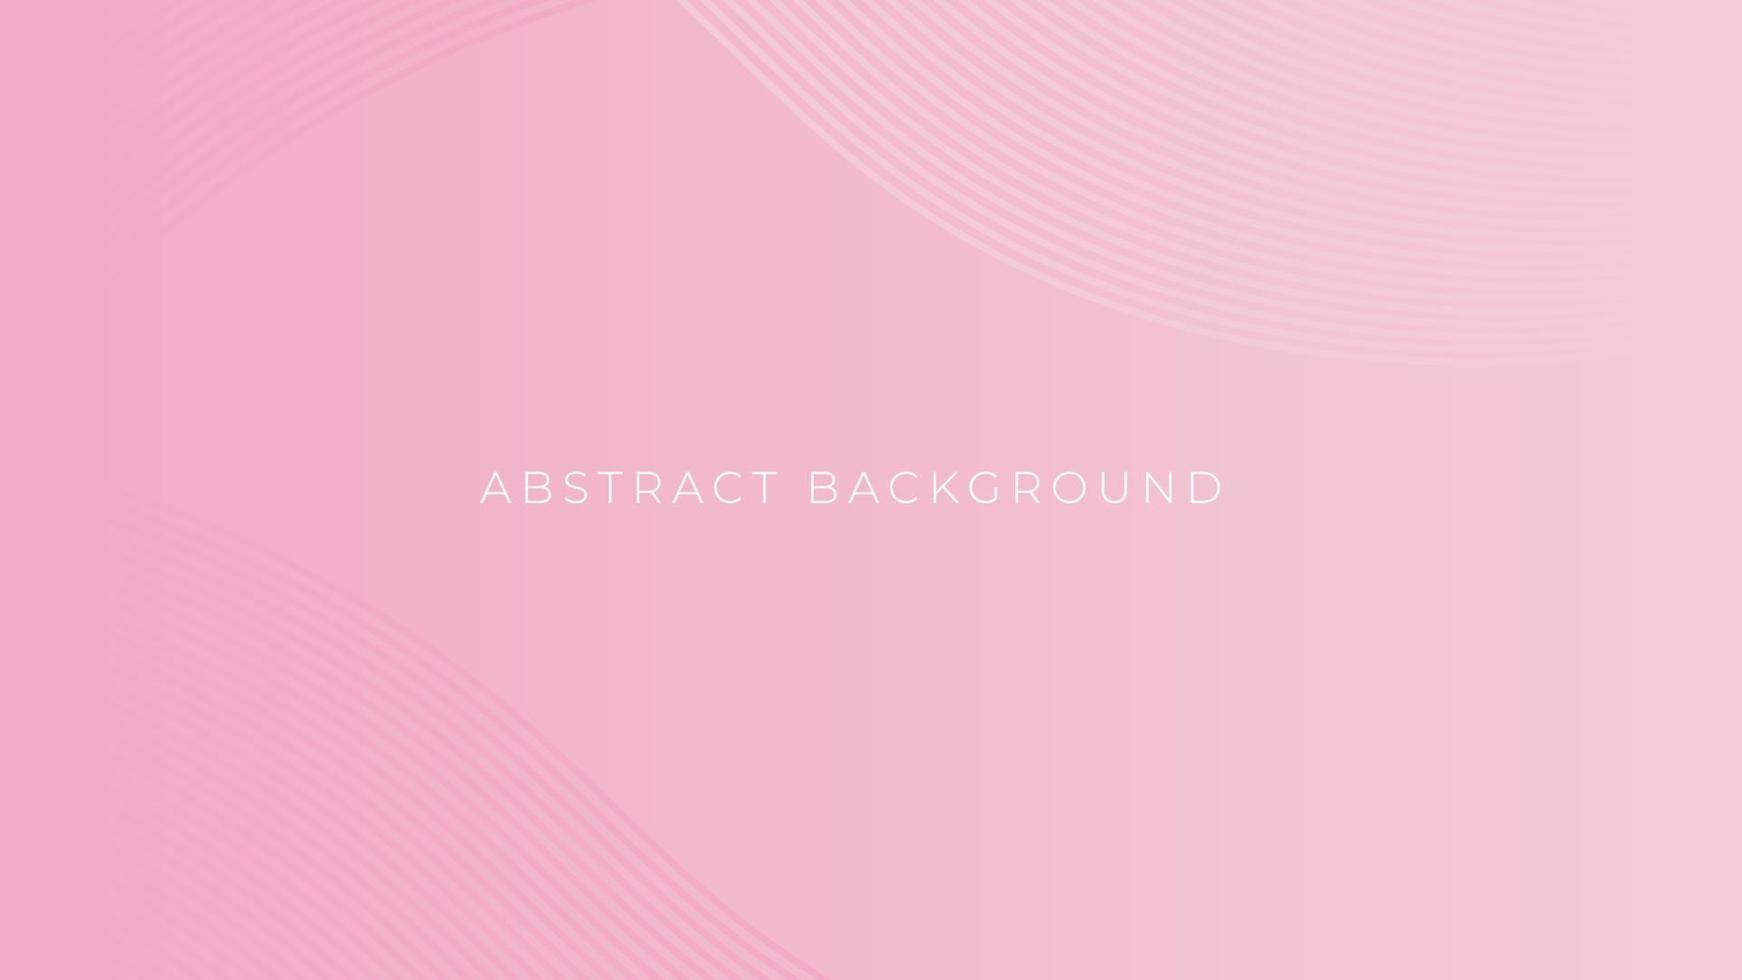 Soft gradient waves simple background. Abstract pink background with curve lines vector